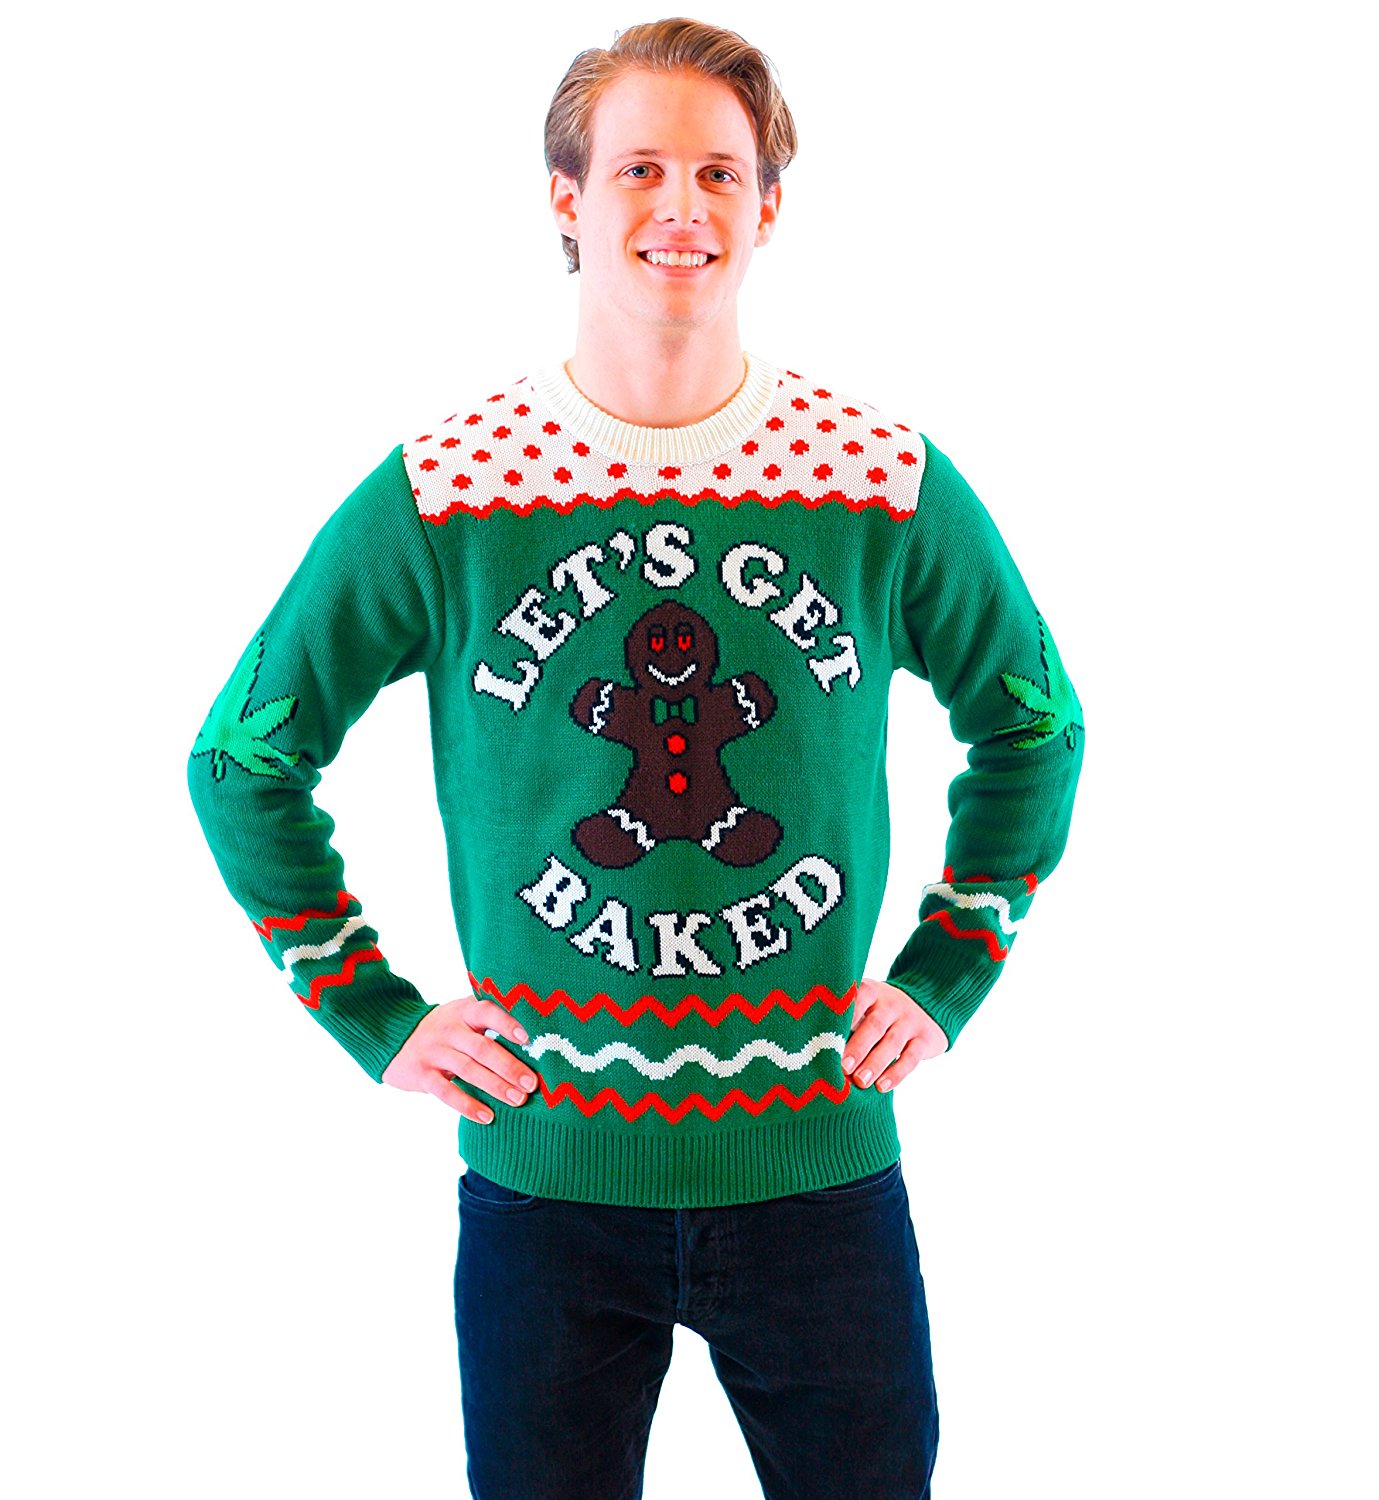 12 Awesome Christmas Sweaters! 152